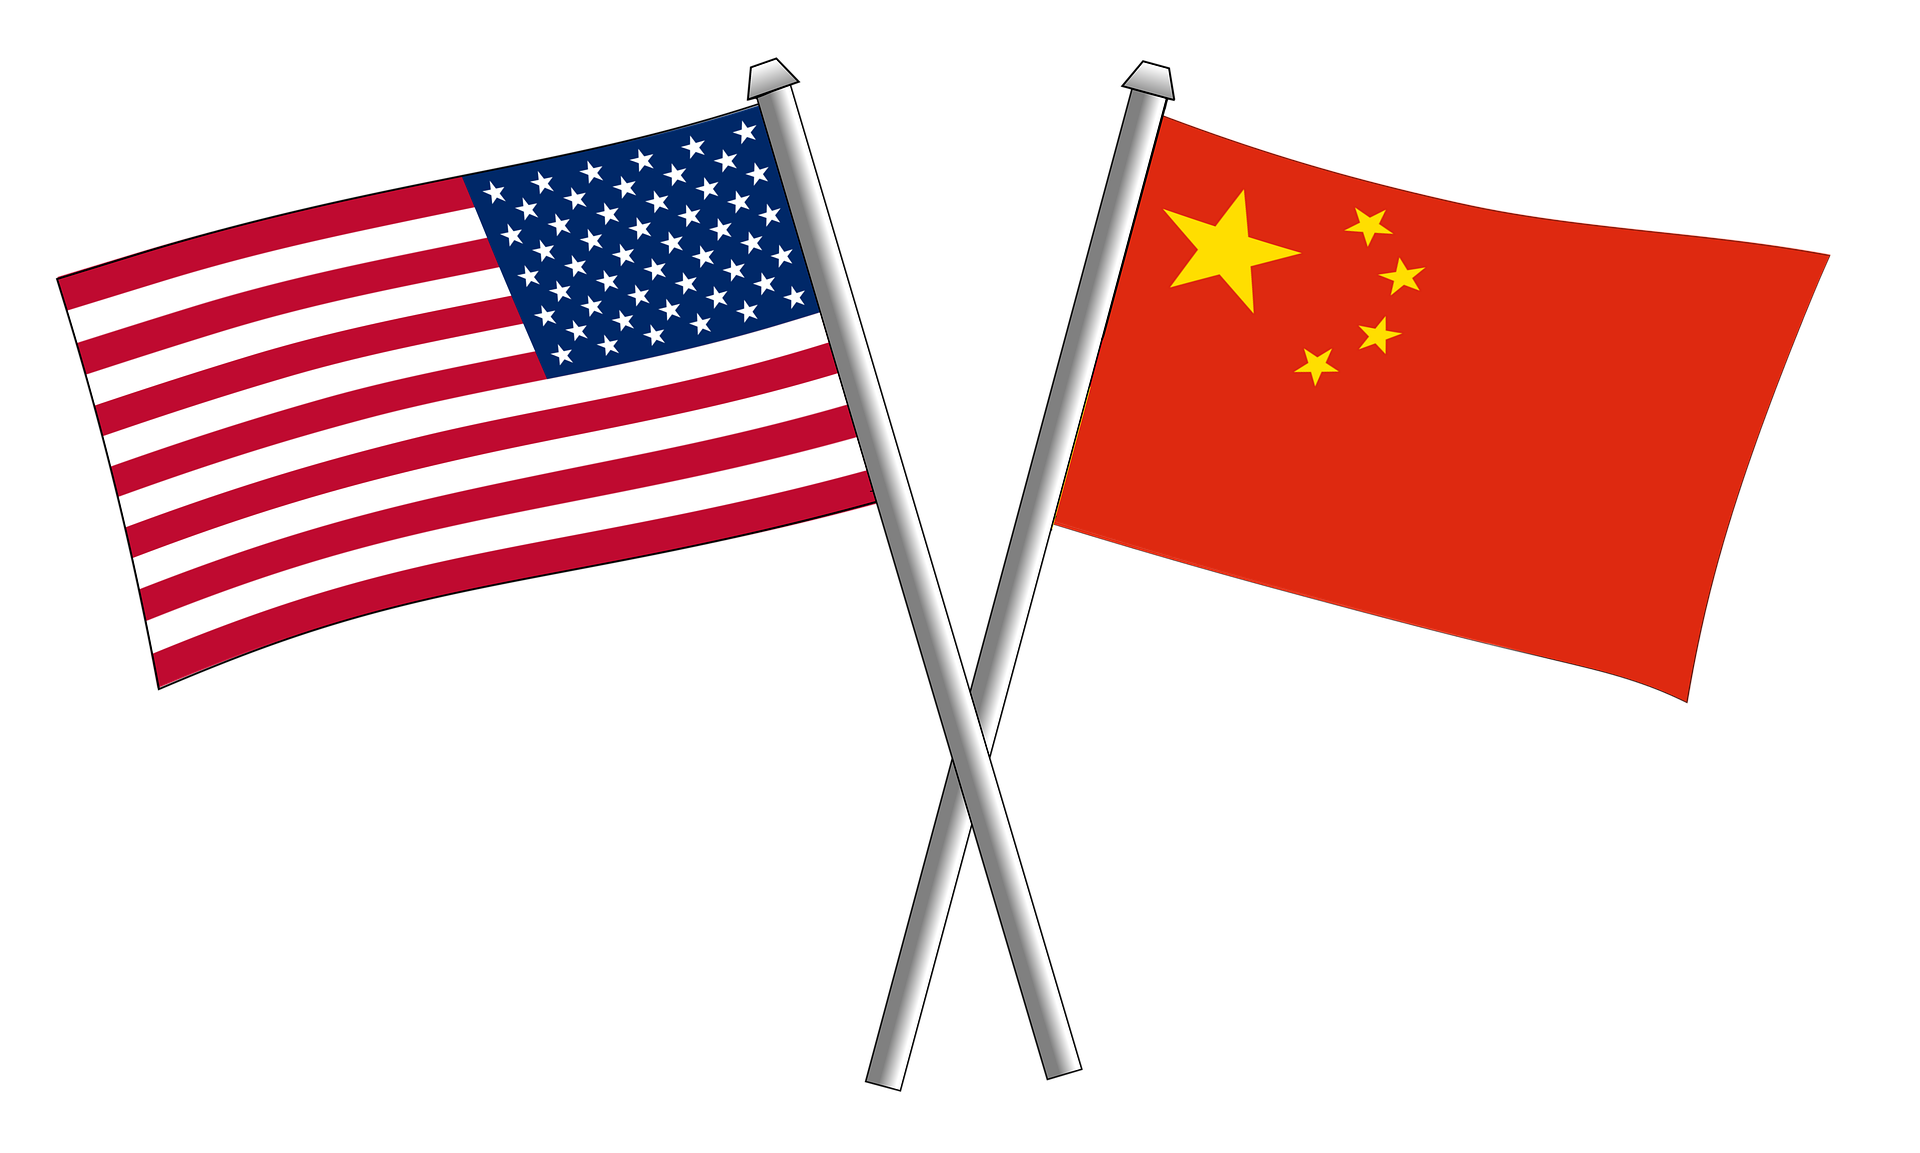 Tariffs_China_Against_a6576_0.png